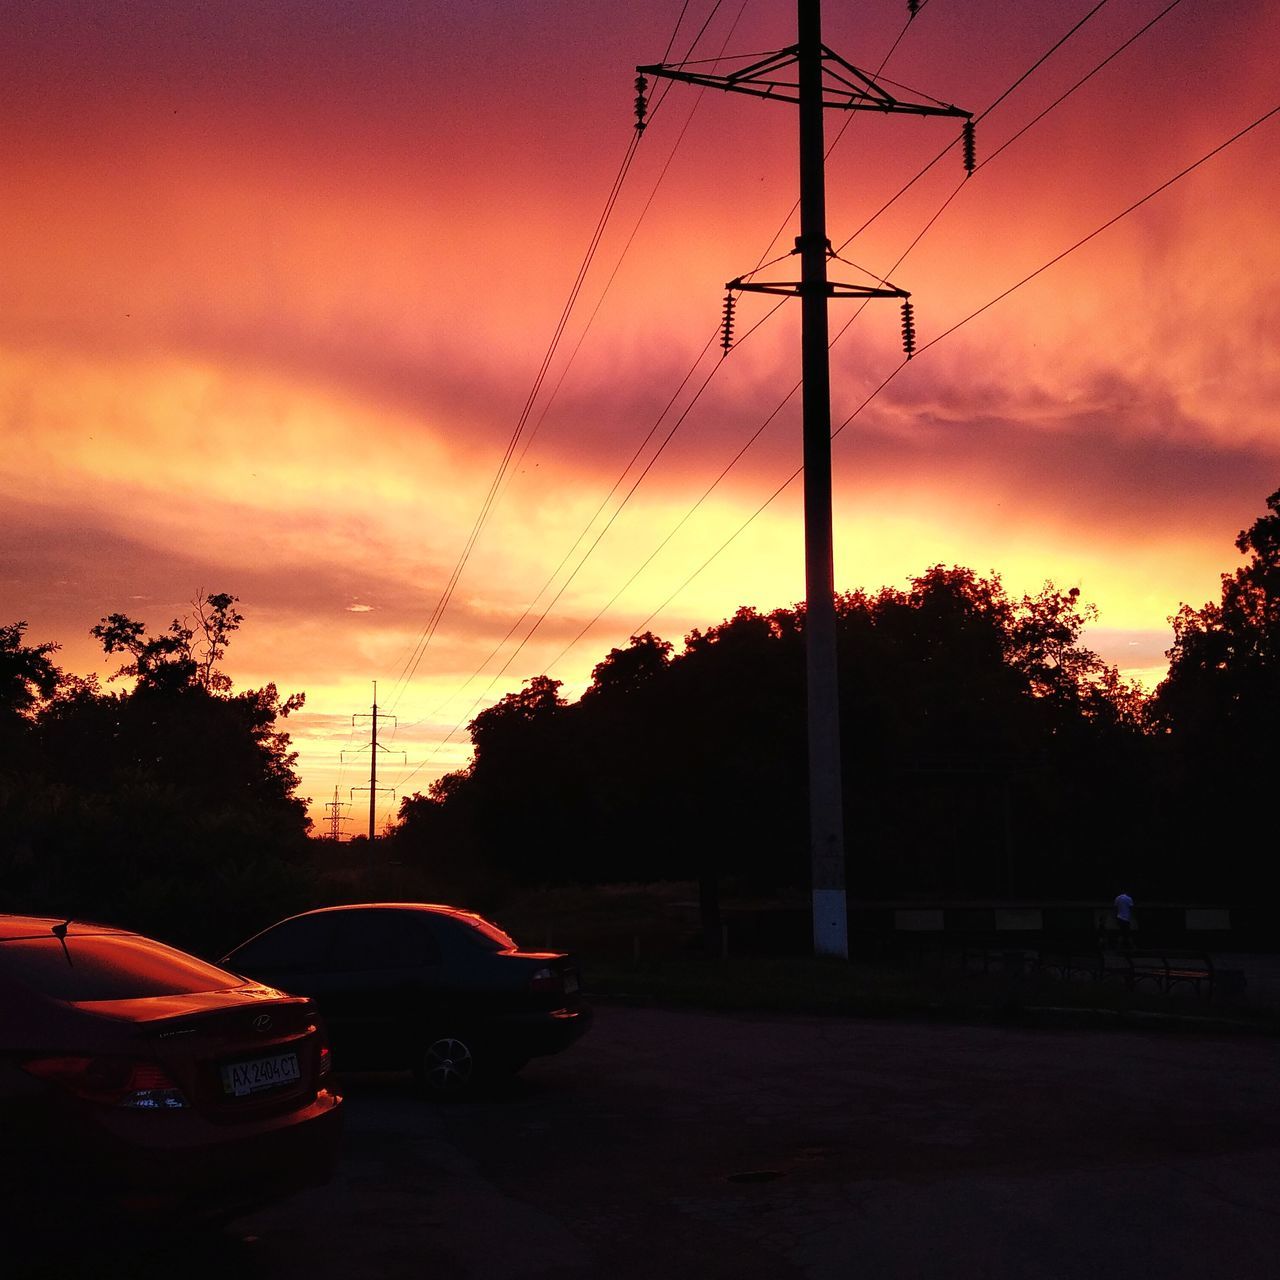 sunset, sky, car, mode of transportation, motor vehicle, electricity, land vehicle, transportation, technology, tree, cable, power line, electricity pylon, cloud - sky, nature, no people, plant, silhouette, connection, orange color, power supply, outdoors